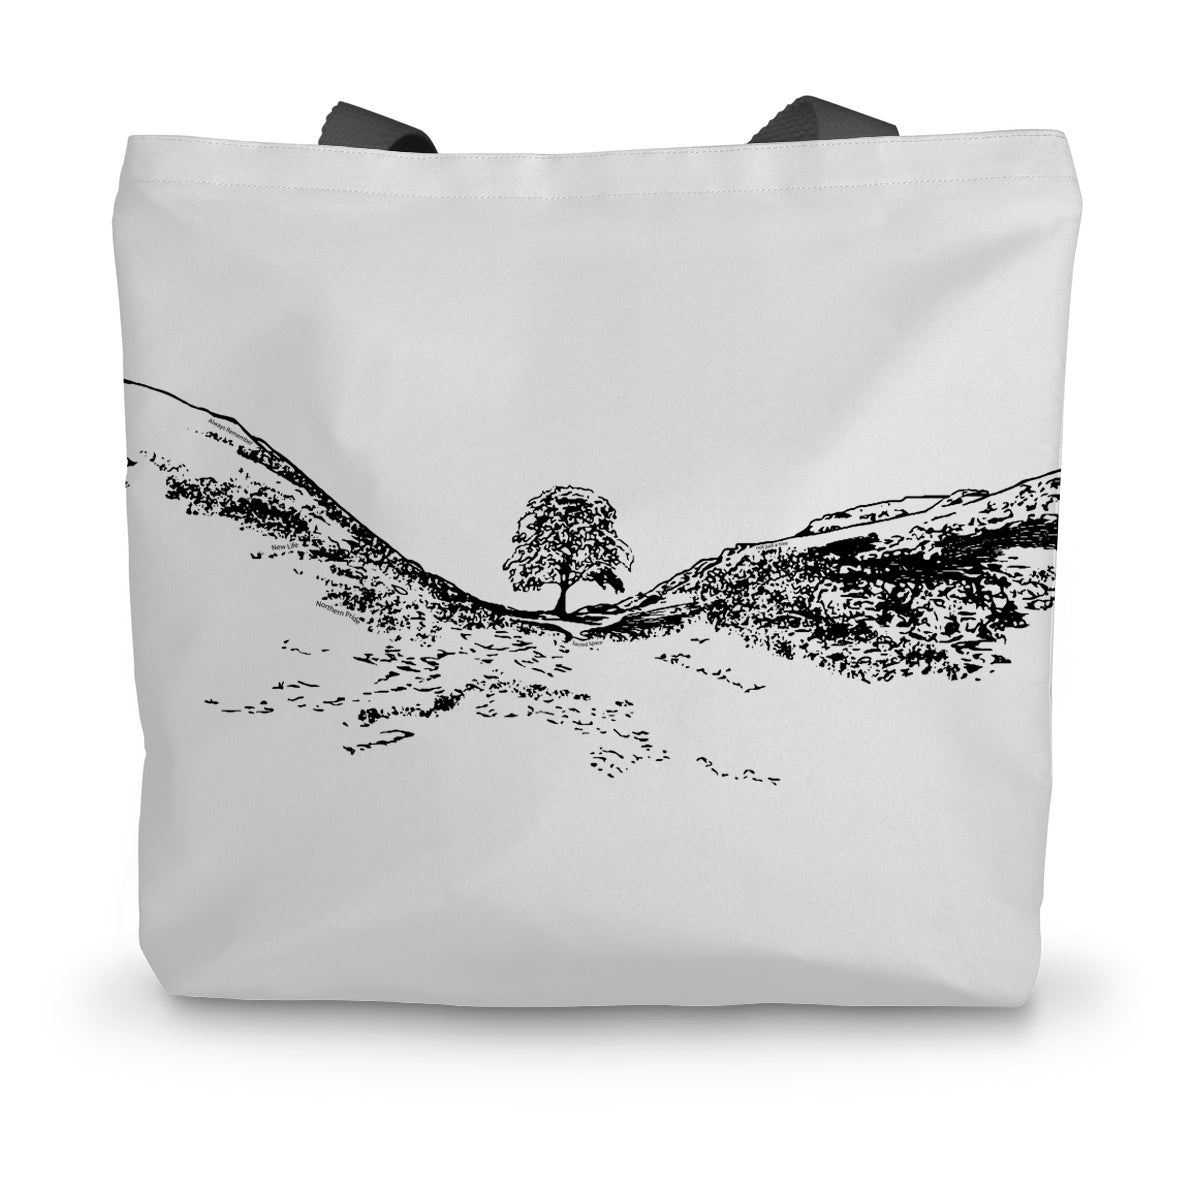 Sycamore Gap themed shopping featuring Sycamore Gap tree design by Powder Butterfly